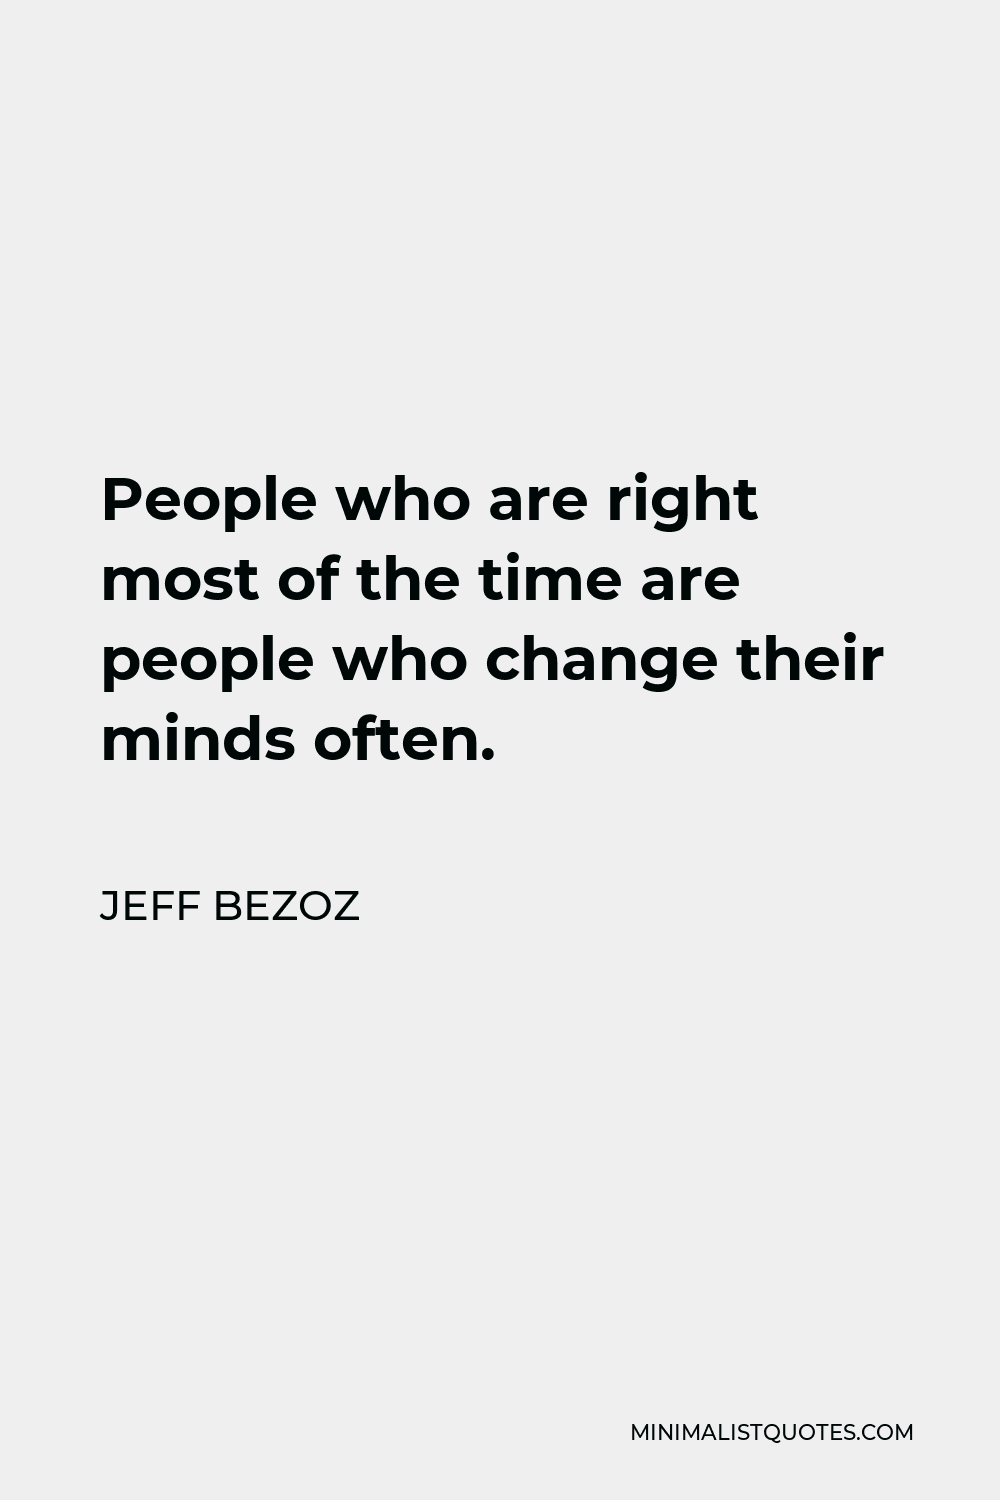 Jeff Bezos Quote: People who are right most of the time are people who ...